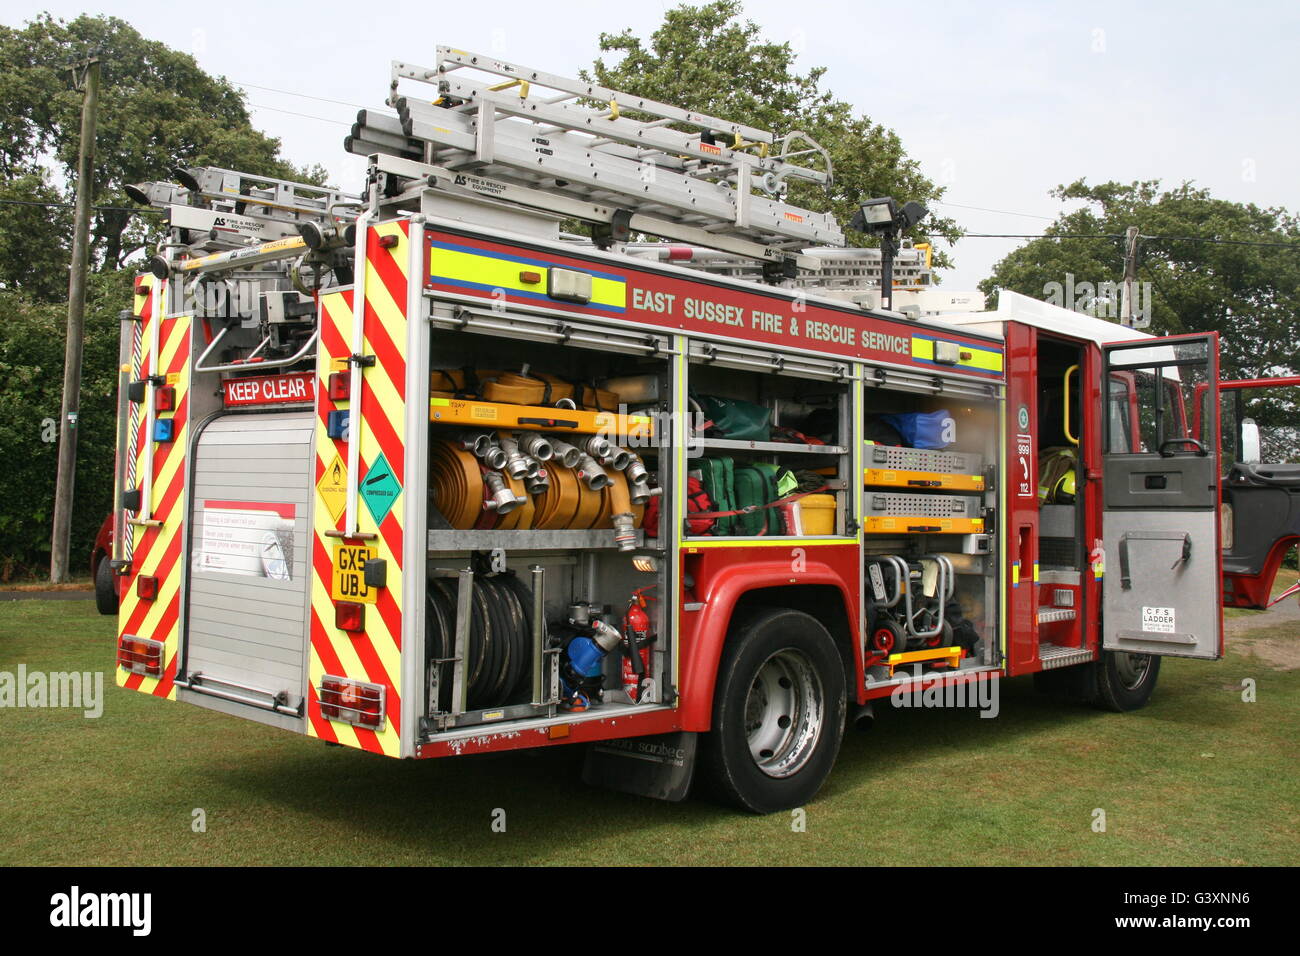 REAR VIEW OF VOLVO FIRE TRUCK OF EAST SUSSEX FIRE & RESCUE WITH DOORS OPEN SHOWING ALL EQUIPMENT Stock Photo